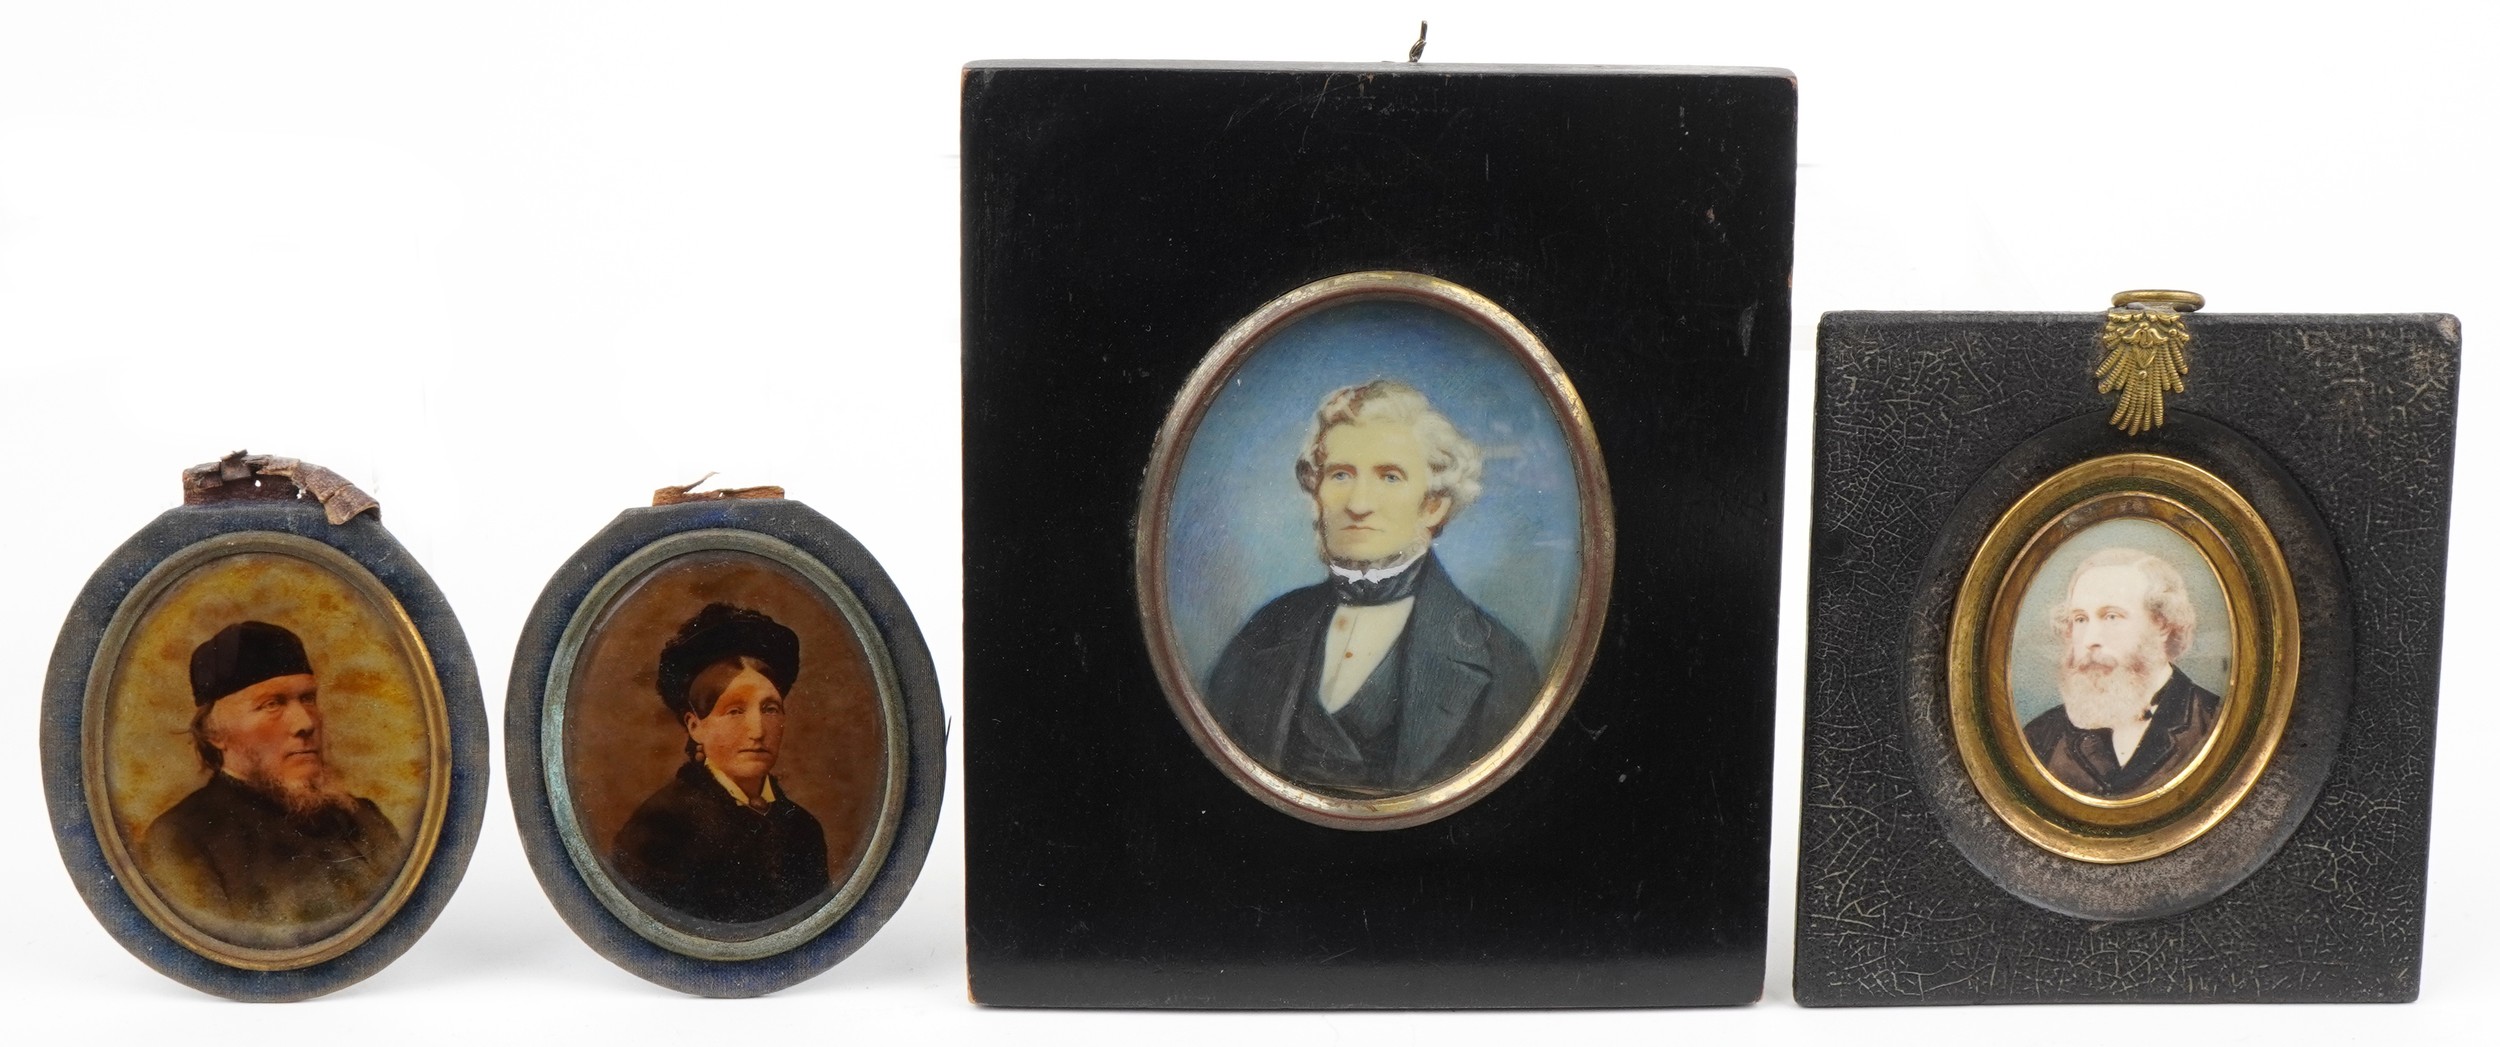 Four hand painted portrait miniatures and photographs, two housed in ebonised frames, including an